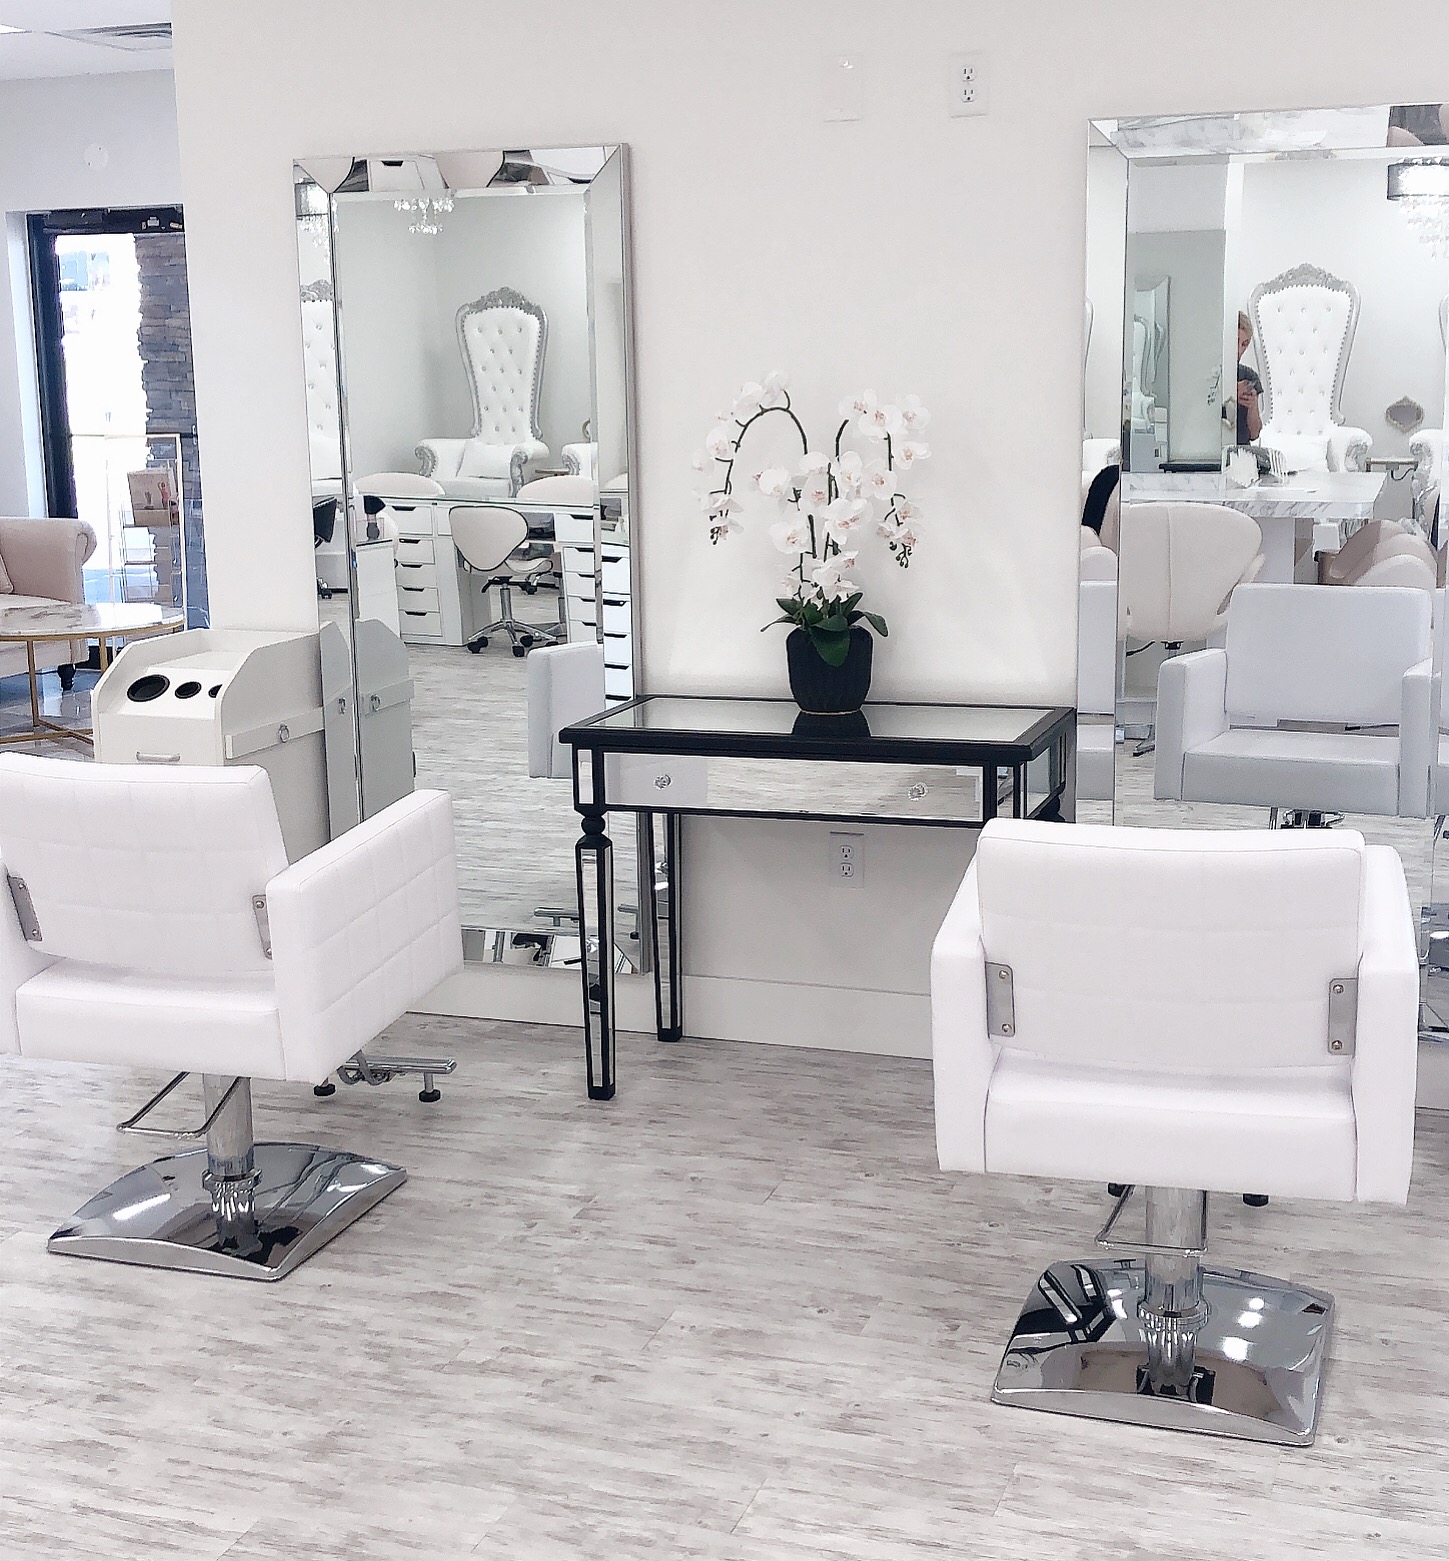 Finished salon with interior design work done